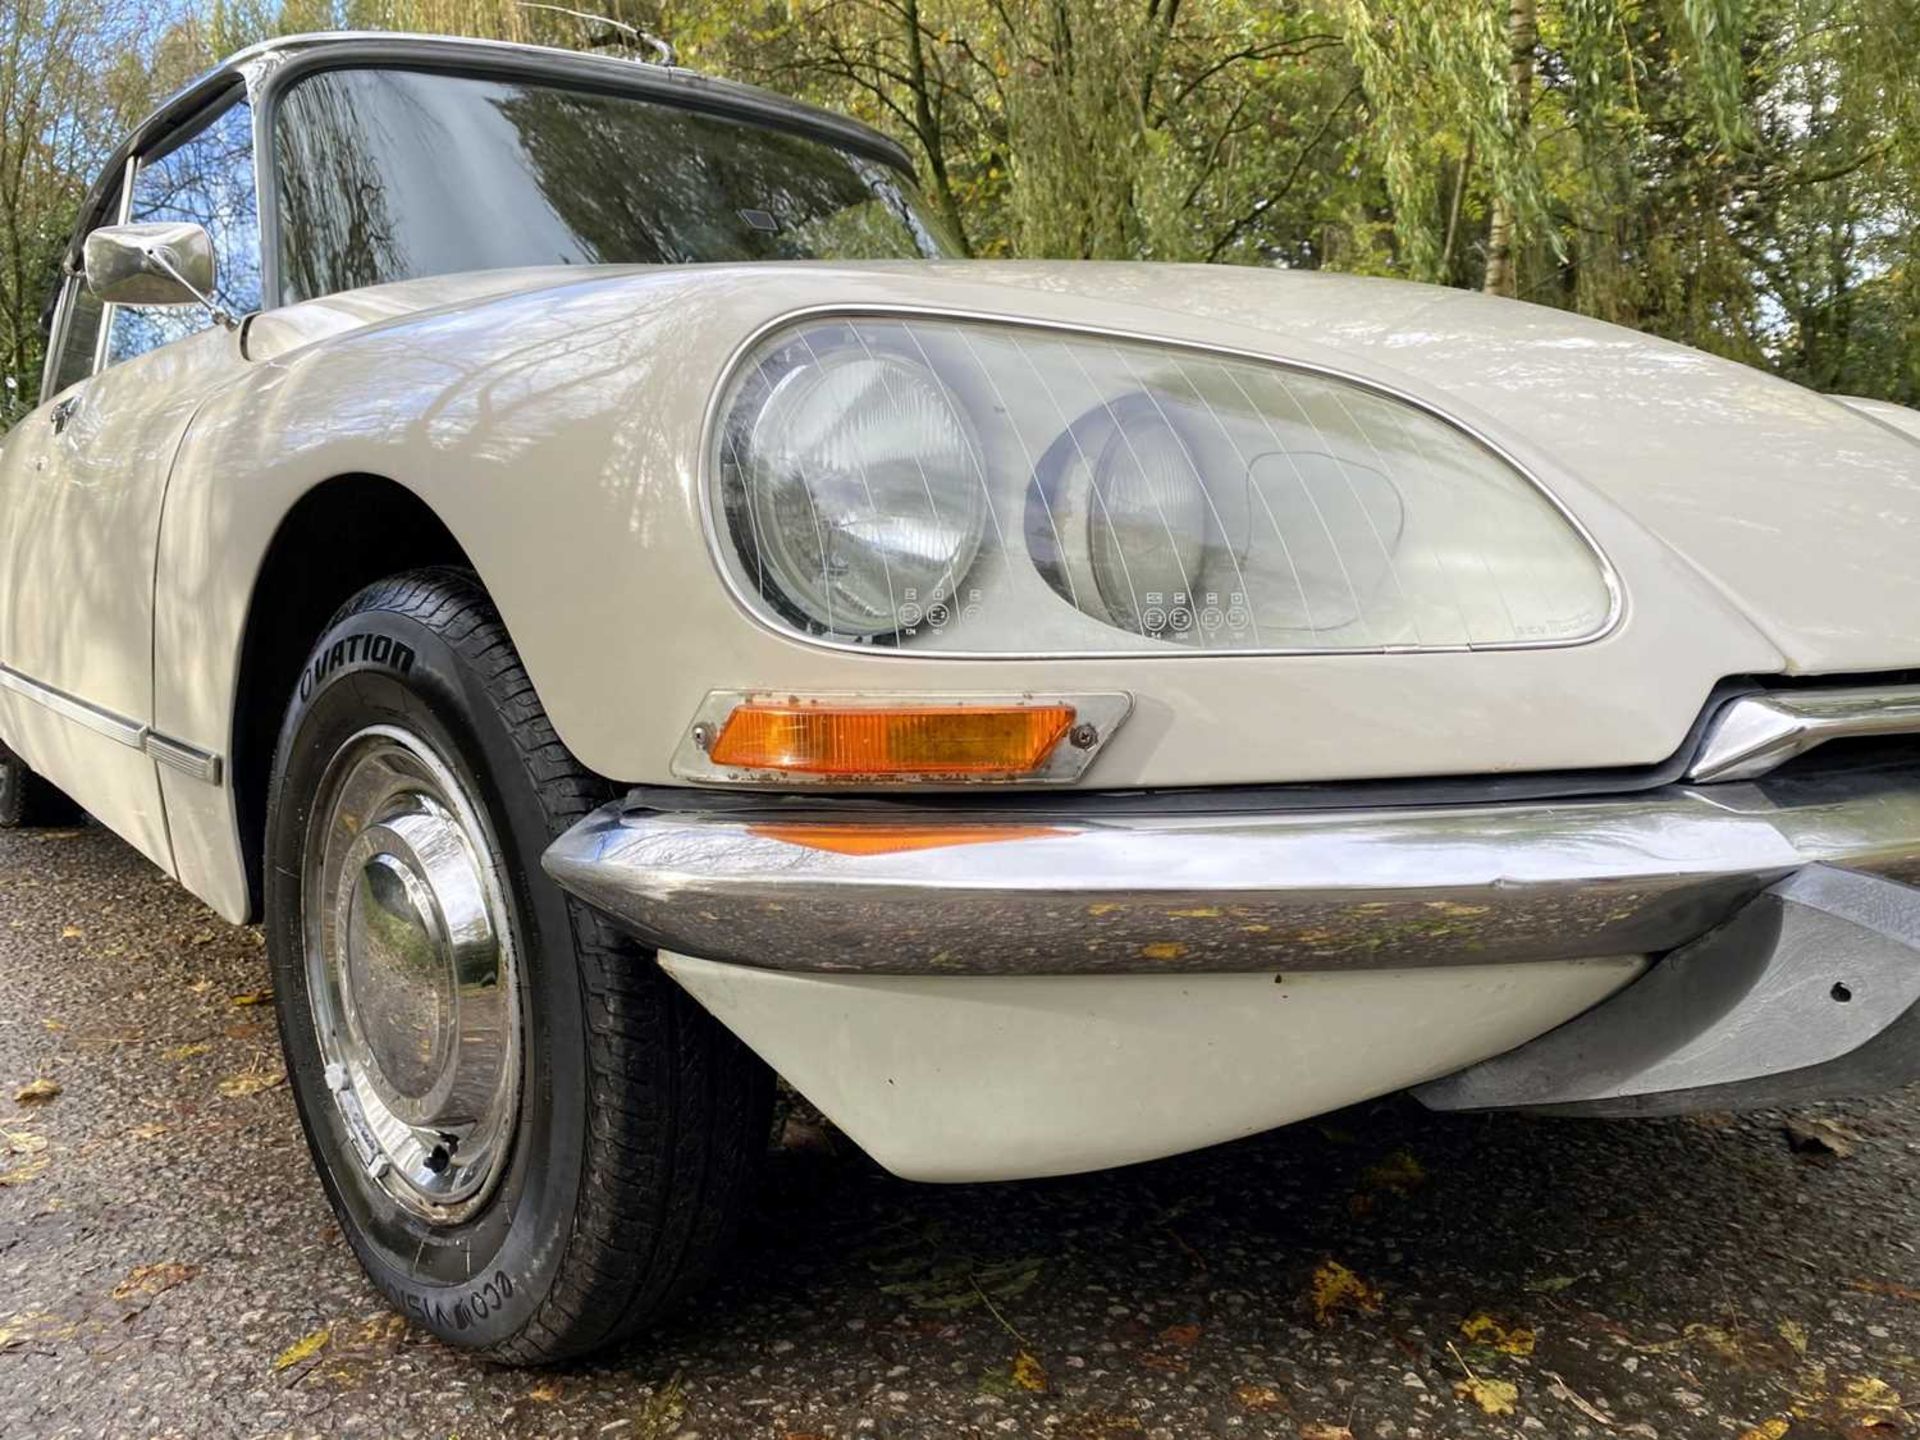 1971 Citroën DS21 Recently completed a 2,000 mile European grand tour - Image 84 of 100